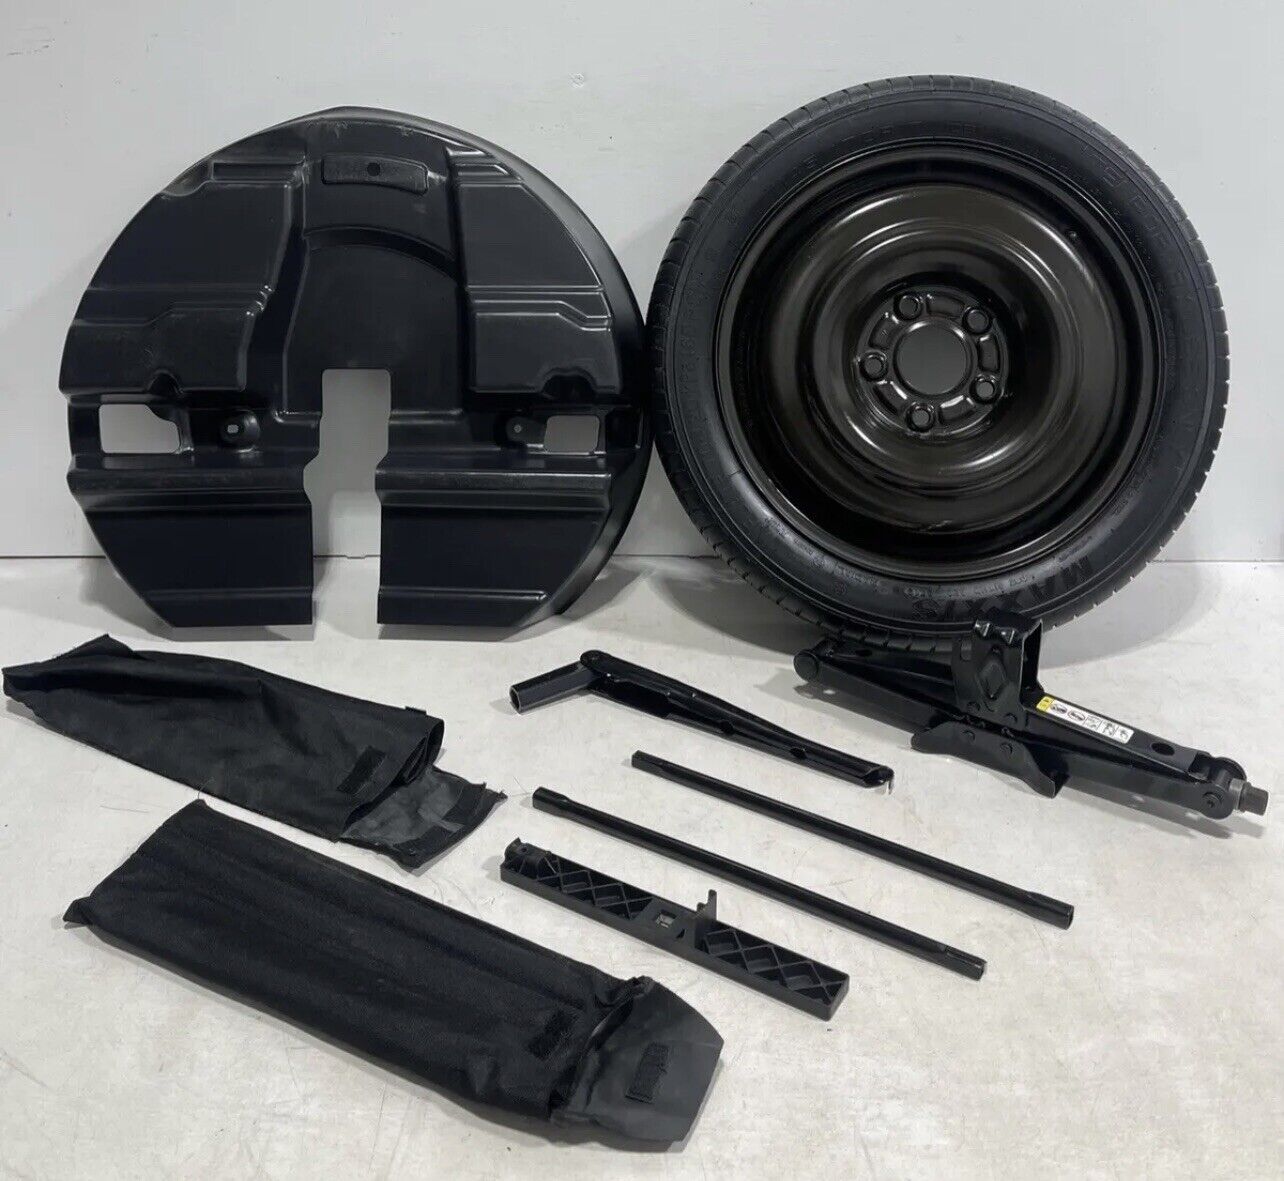 08-20 DODGE GRAND CARAVAN COMPACT SPARE WHEEL TIRE JACK COVER WRENCH KIT SET 17”